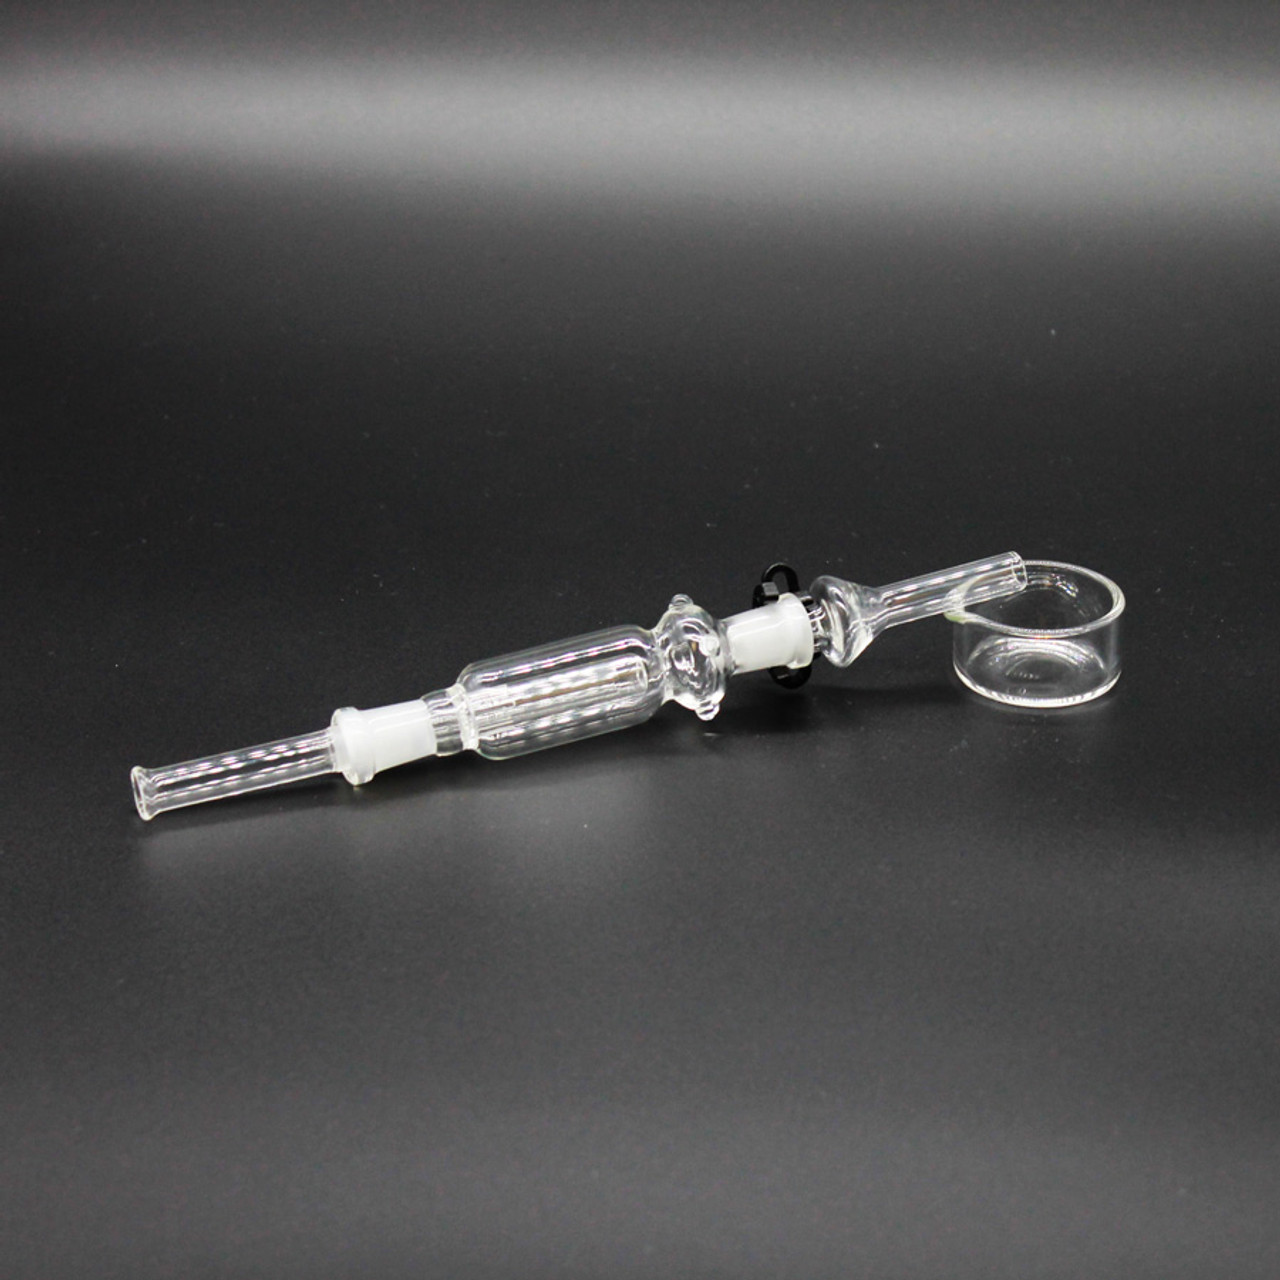 Dab Straw Kit | Nectar Collector Kit | 10mm Stainless Steel Straw